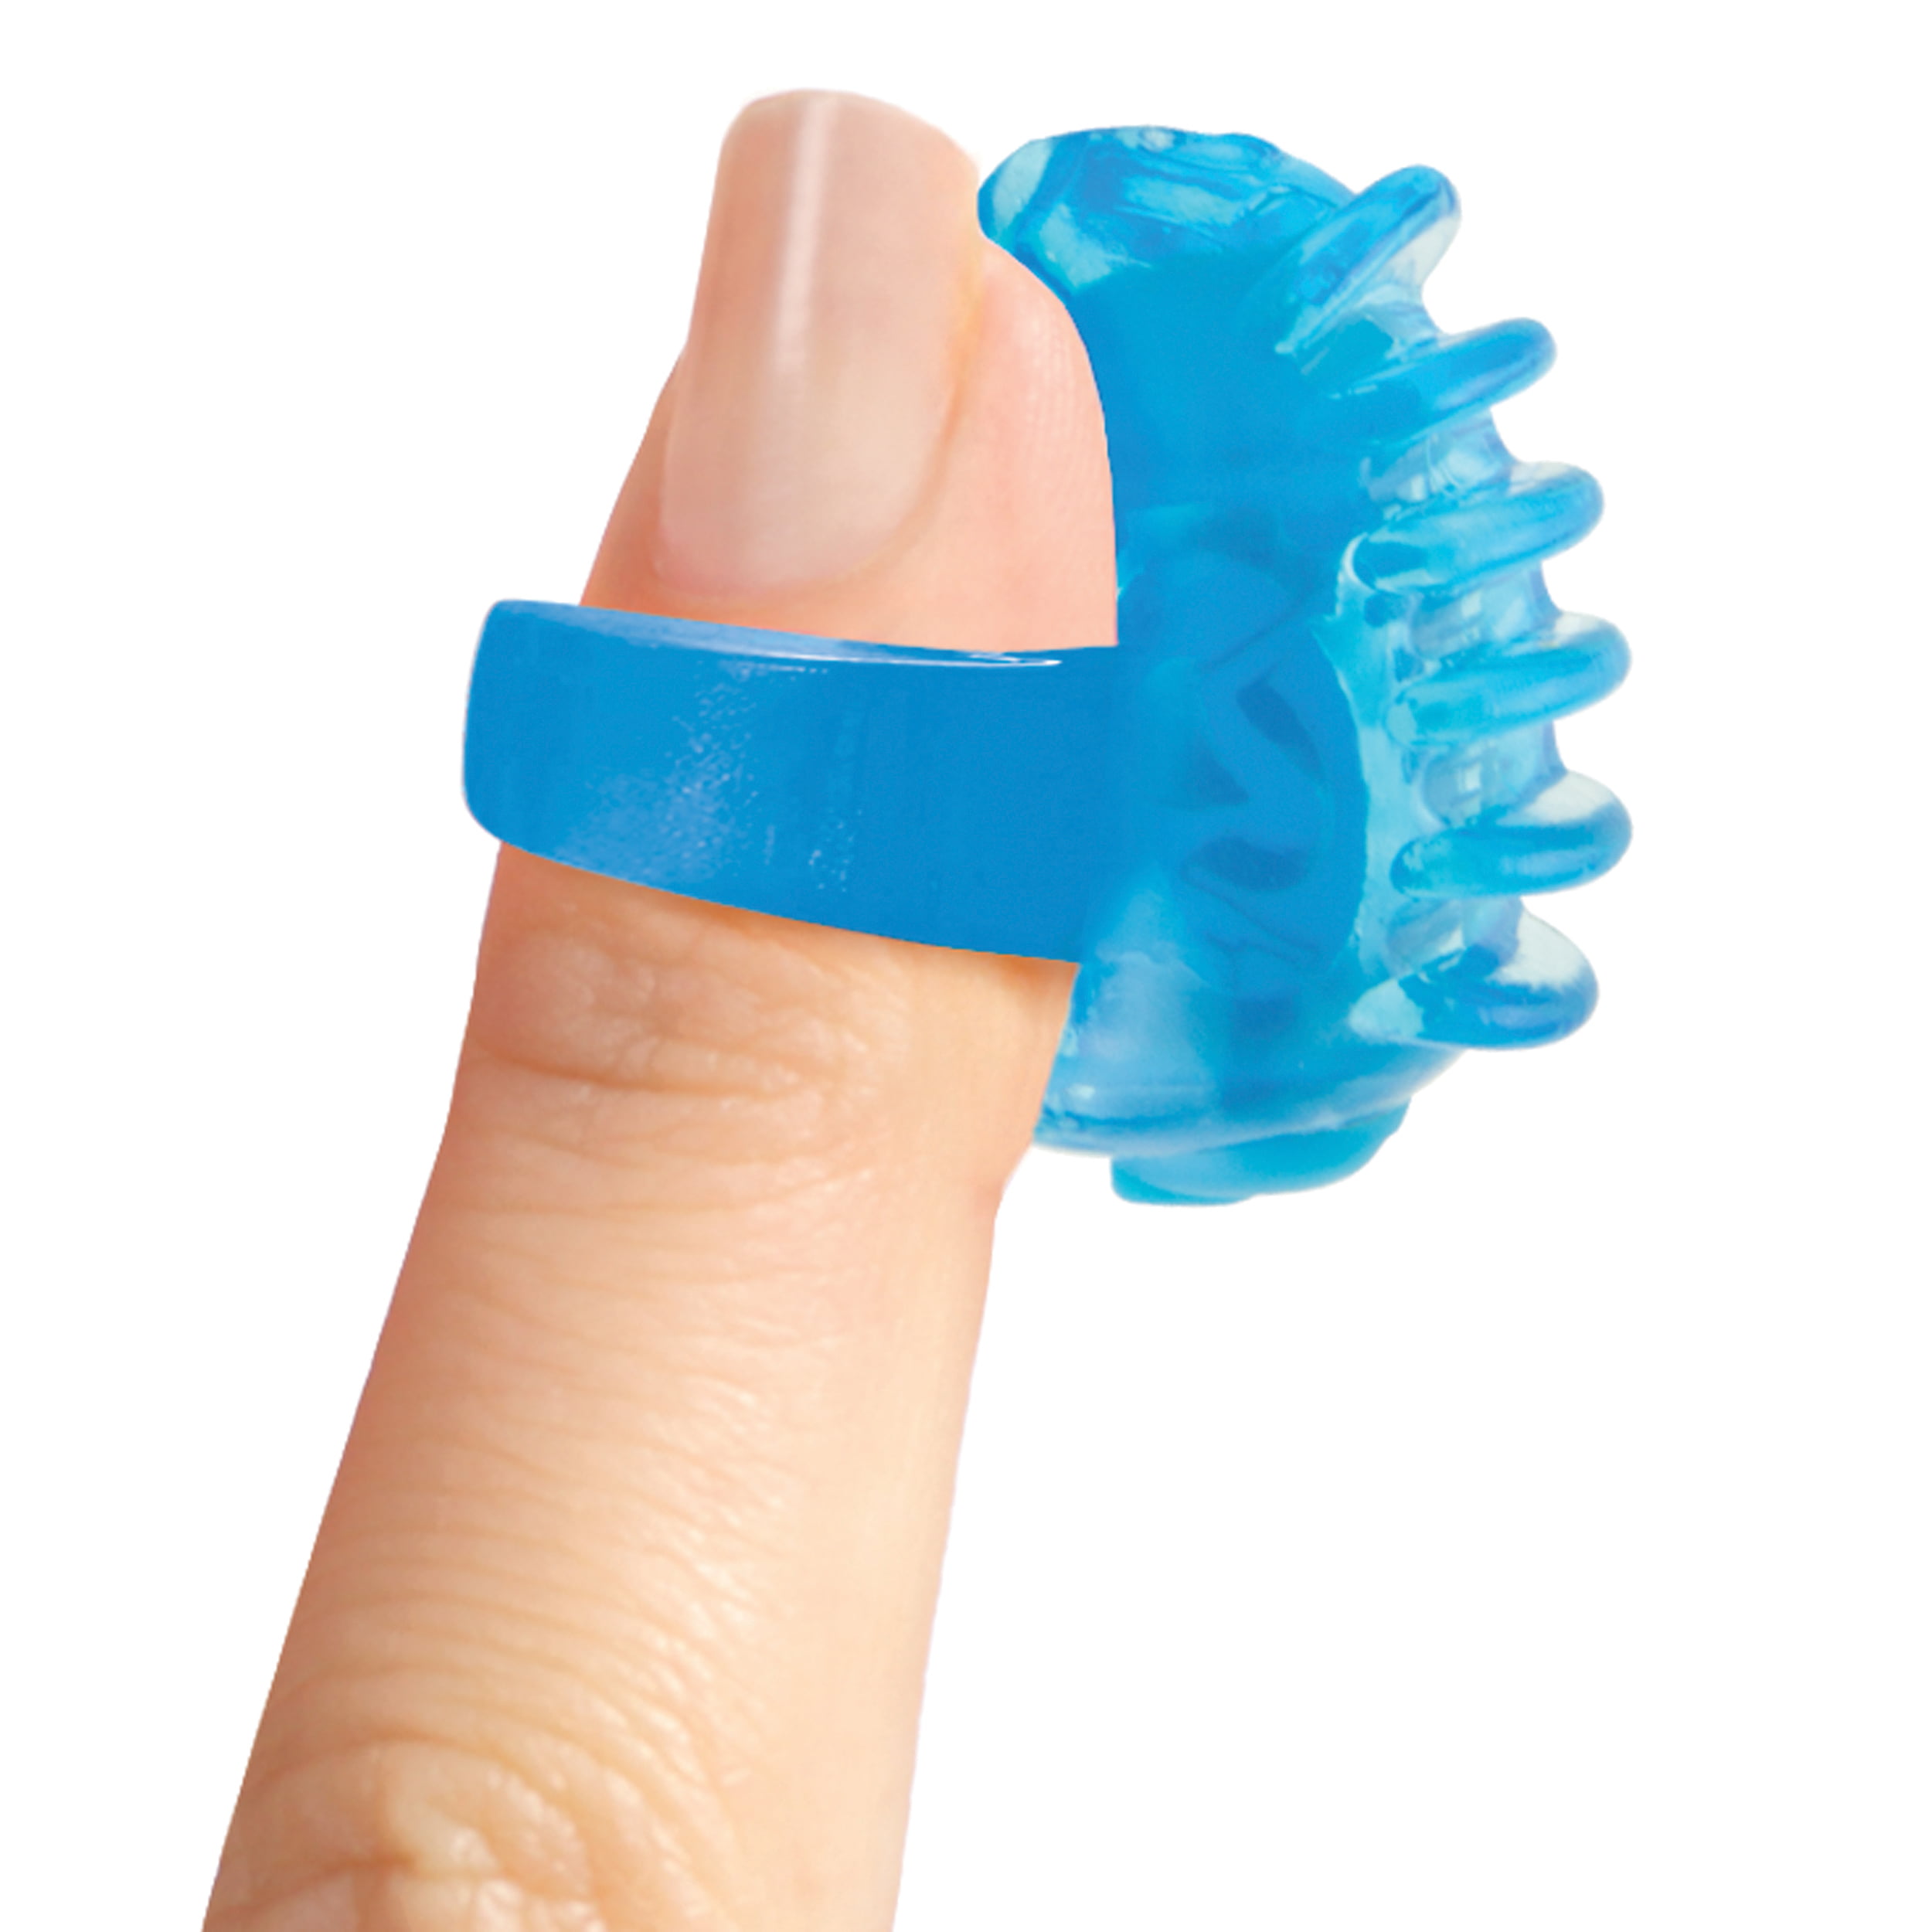 Screaming O Fing O Tips Micro Fingertip Vibe Pleasure Products 